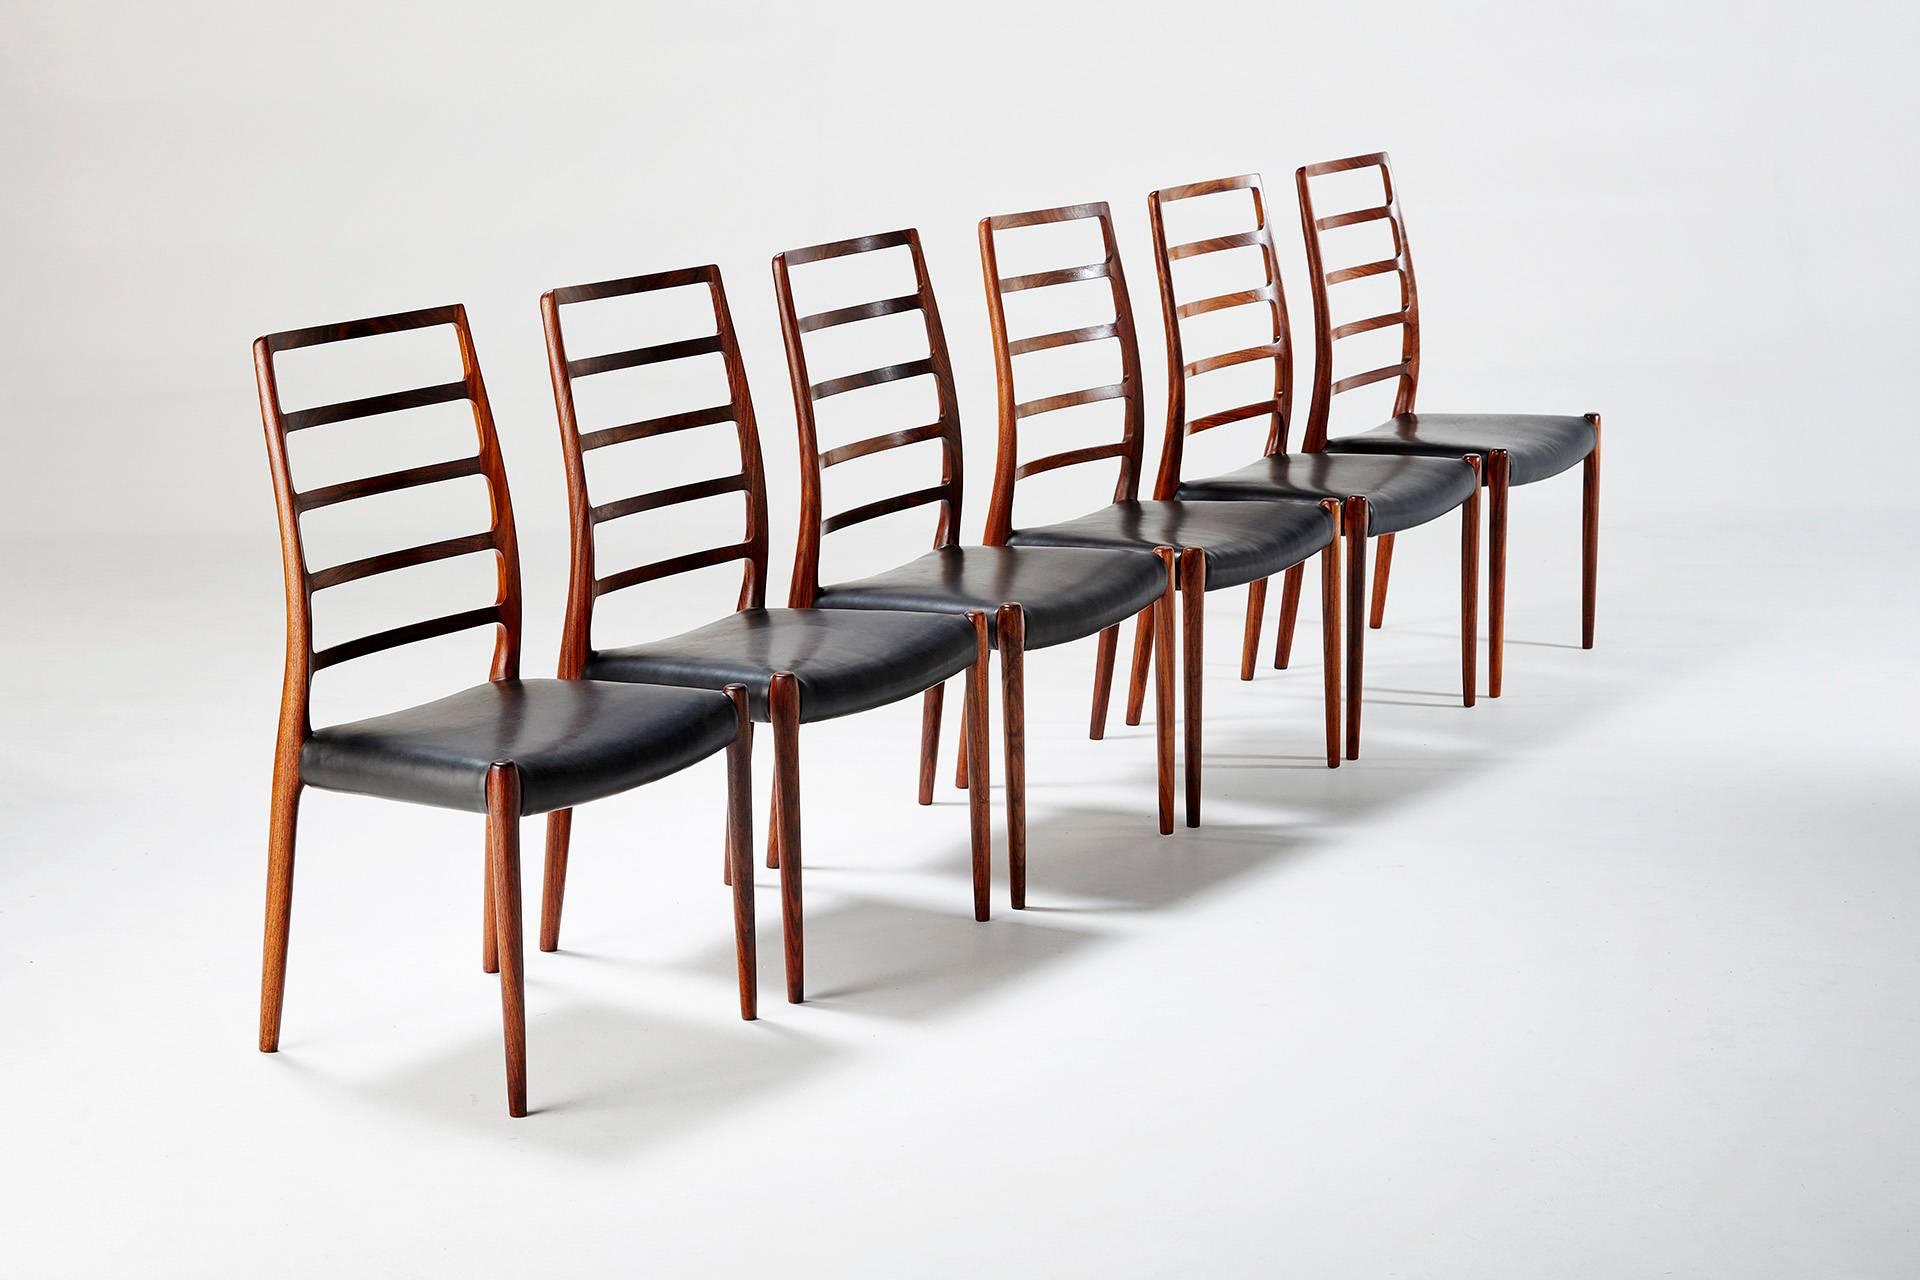 Produced by J.L. Moller Mobelfabrik. Made from solid rosewood with luxurious, exotic grain. Seats reupholstered in black aniline leather. Rarely seen set.